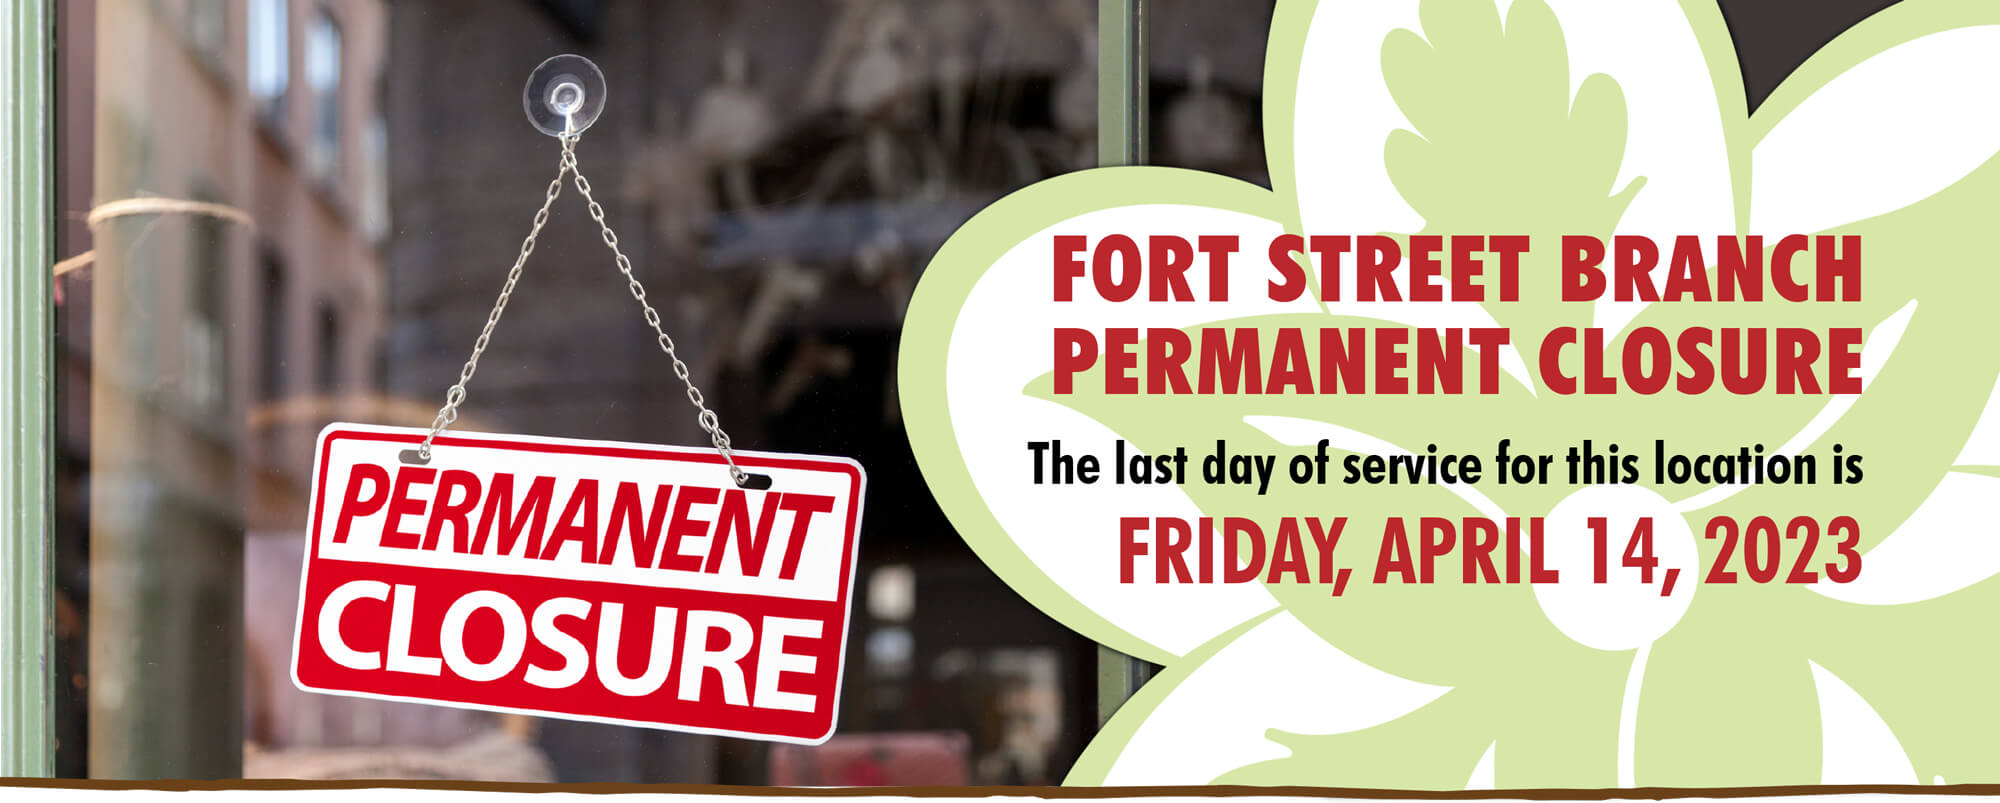 Our Fort Street Branch will be permanently closed.  The last day of service for this location is Friday, April 14, 2023.